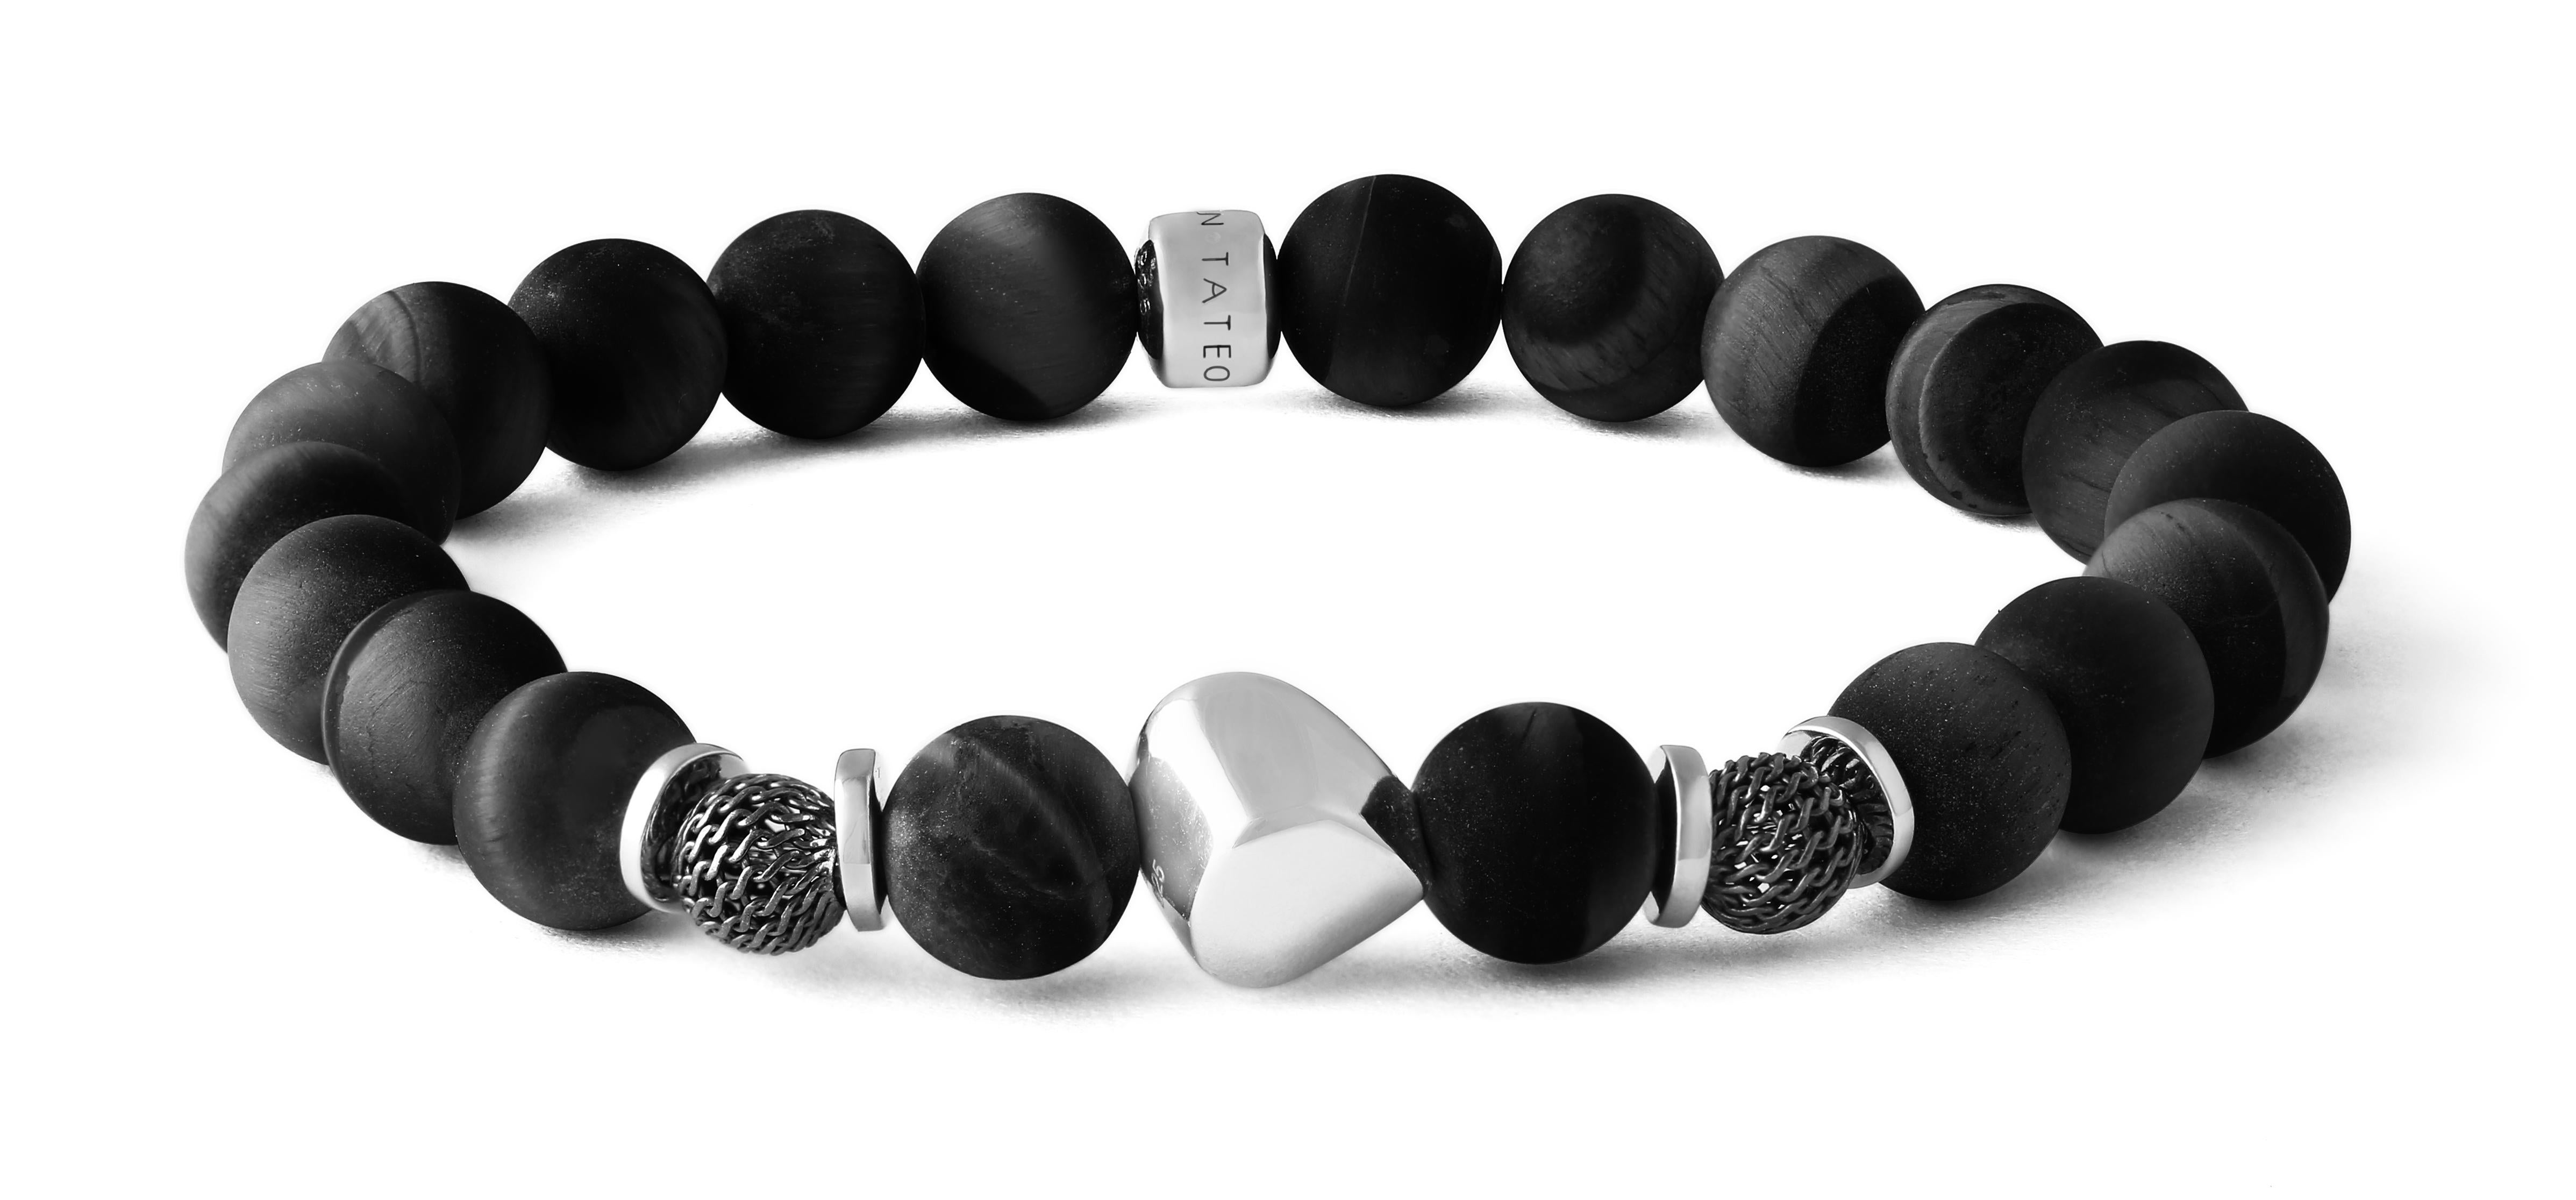 Discover our unique bracelets which feature an organic-shaped silver boulder with contrasting industrial black rhodium mesh beads either side, drawing on the striking contrast of mechanical and natural. Also encompassed by silver discs, this